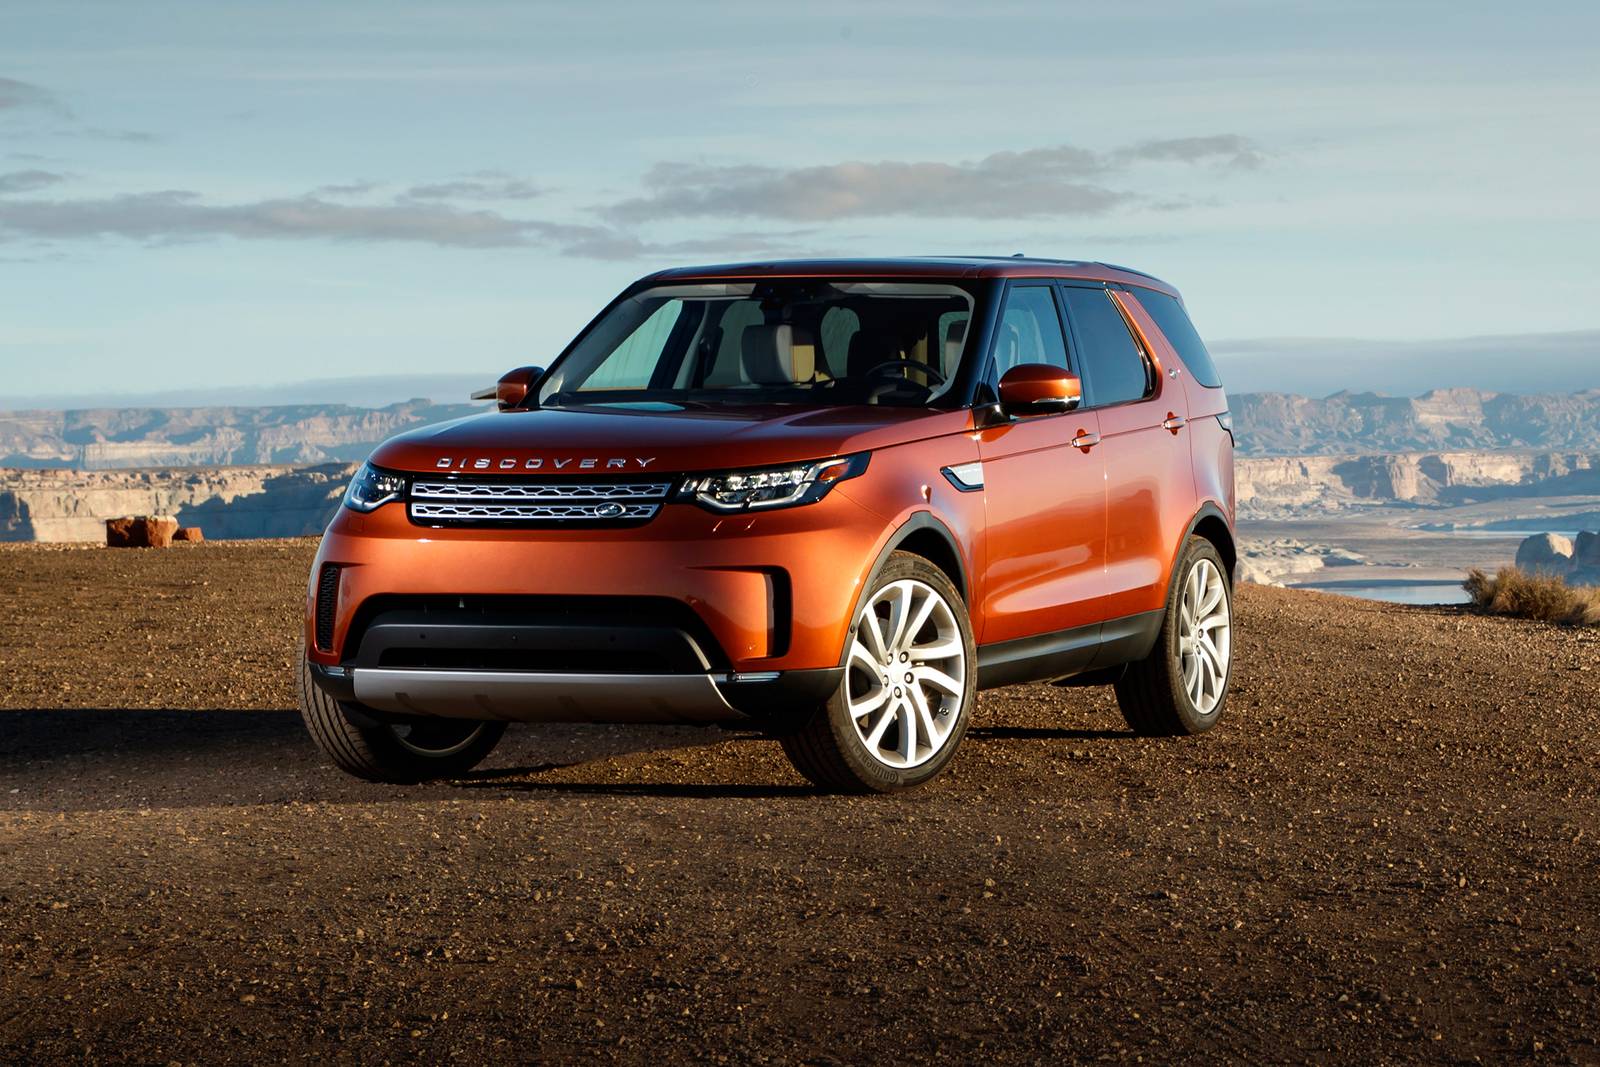 2018 Land Rover Discovery Review & Ratings | Edmunds